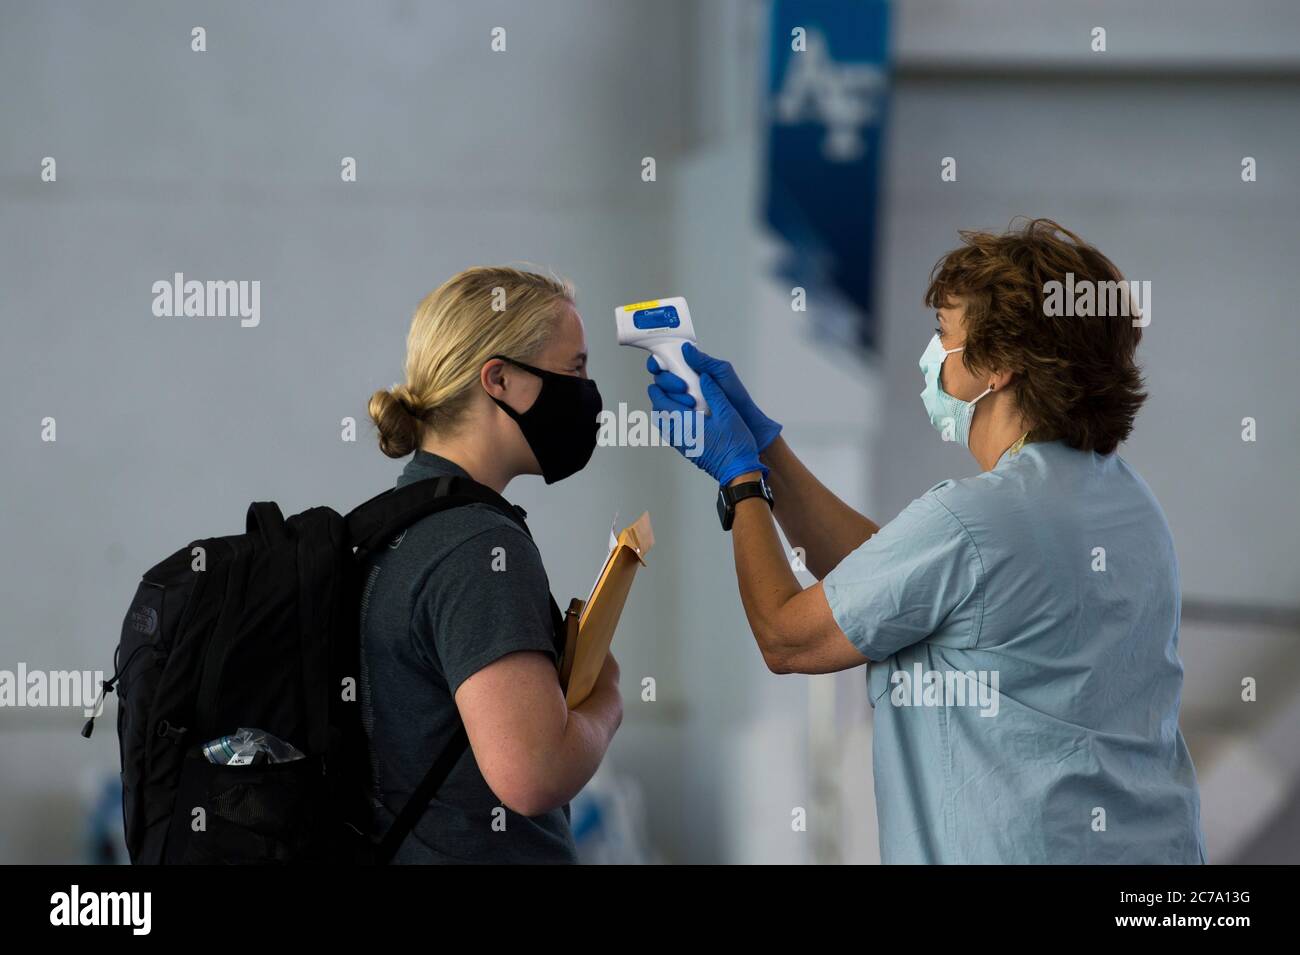 A U.S. Air Force medic checks the temperature of academy cadets from the class of 2024 on arrival, as they become the first cadet class under the COVID-19 pandemic at the Air Force Academy June 25, 2020 in Colorado Springs, Colorado. Stock Photo